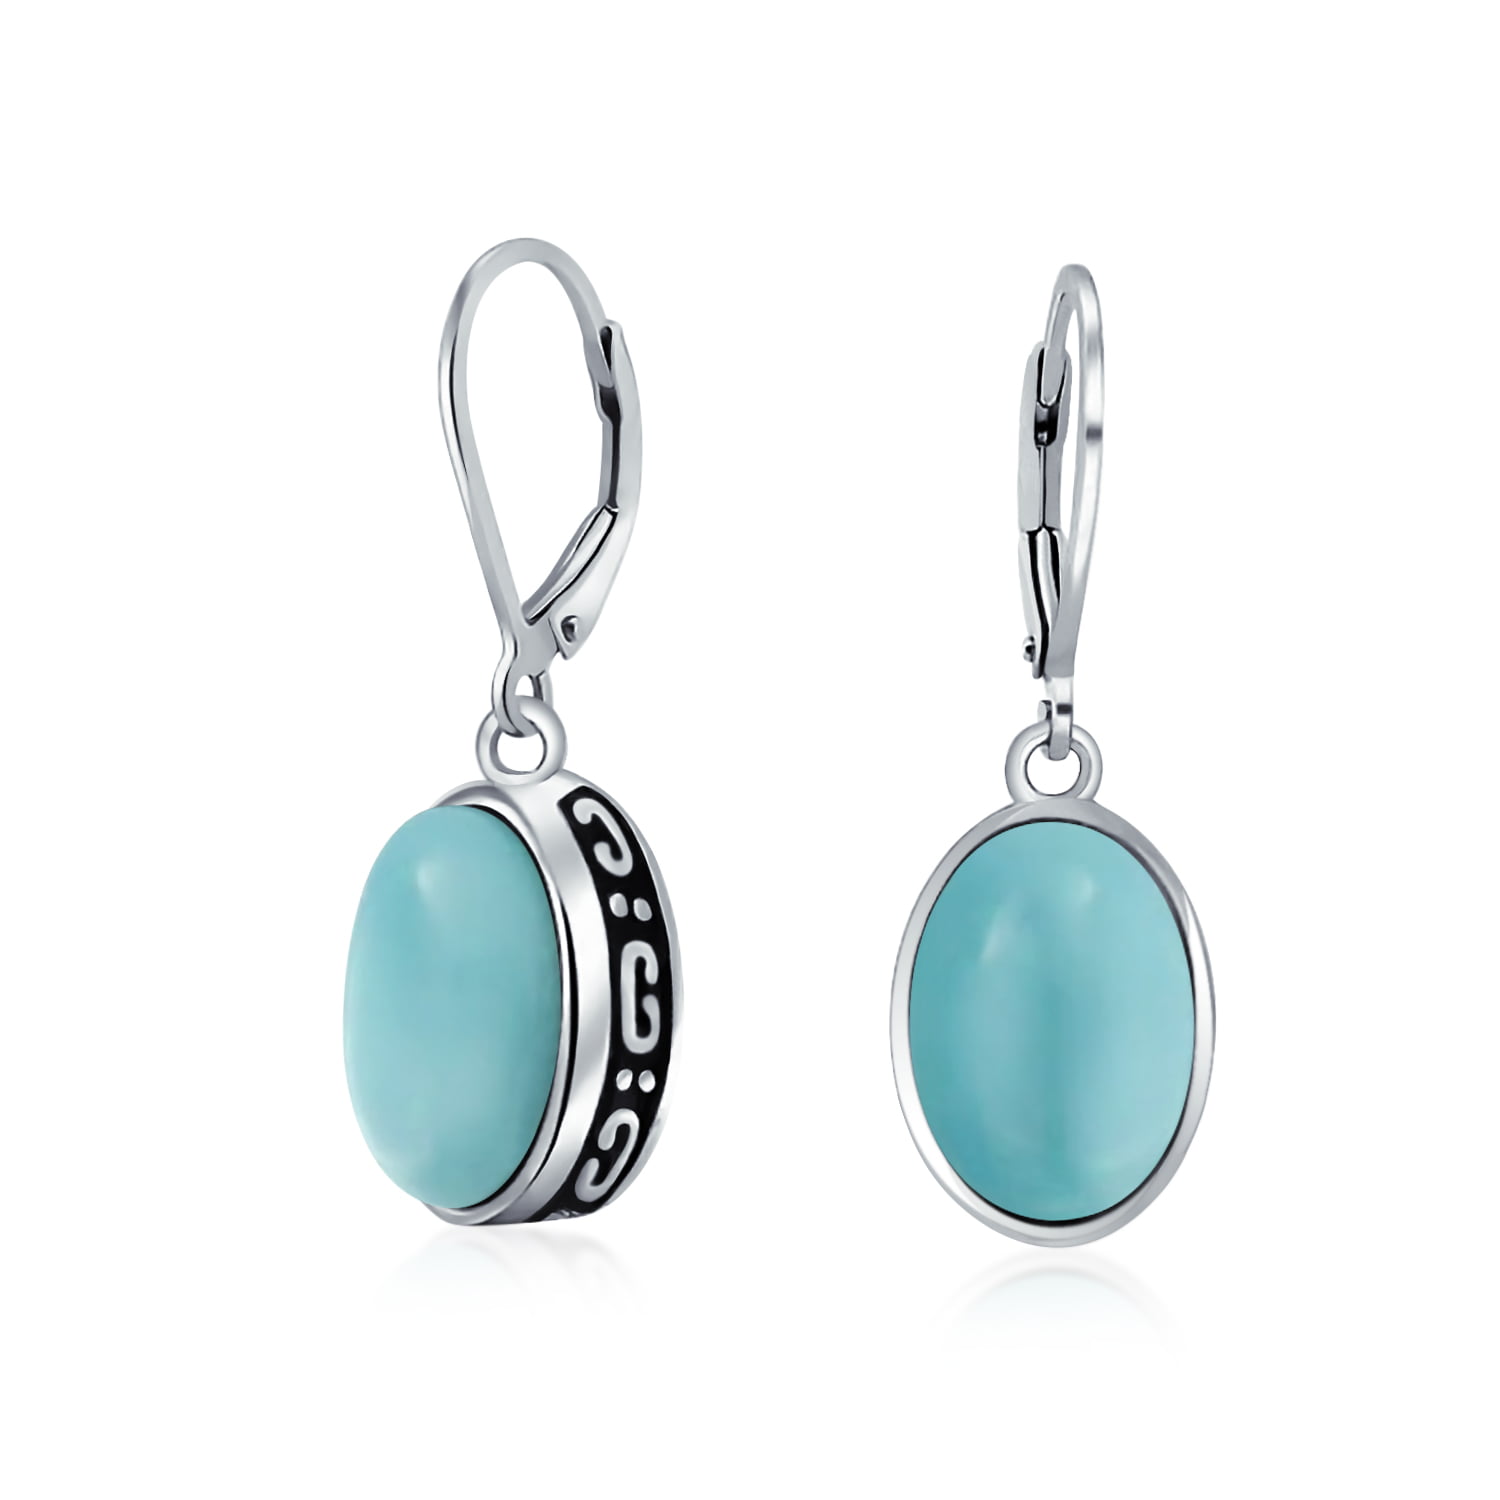 Details about   White Rhodium 925 Silver Green Onyx Gemstone Designer Hook Earrings Jewelry